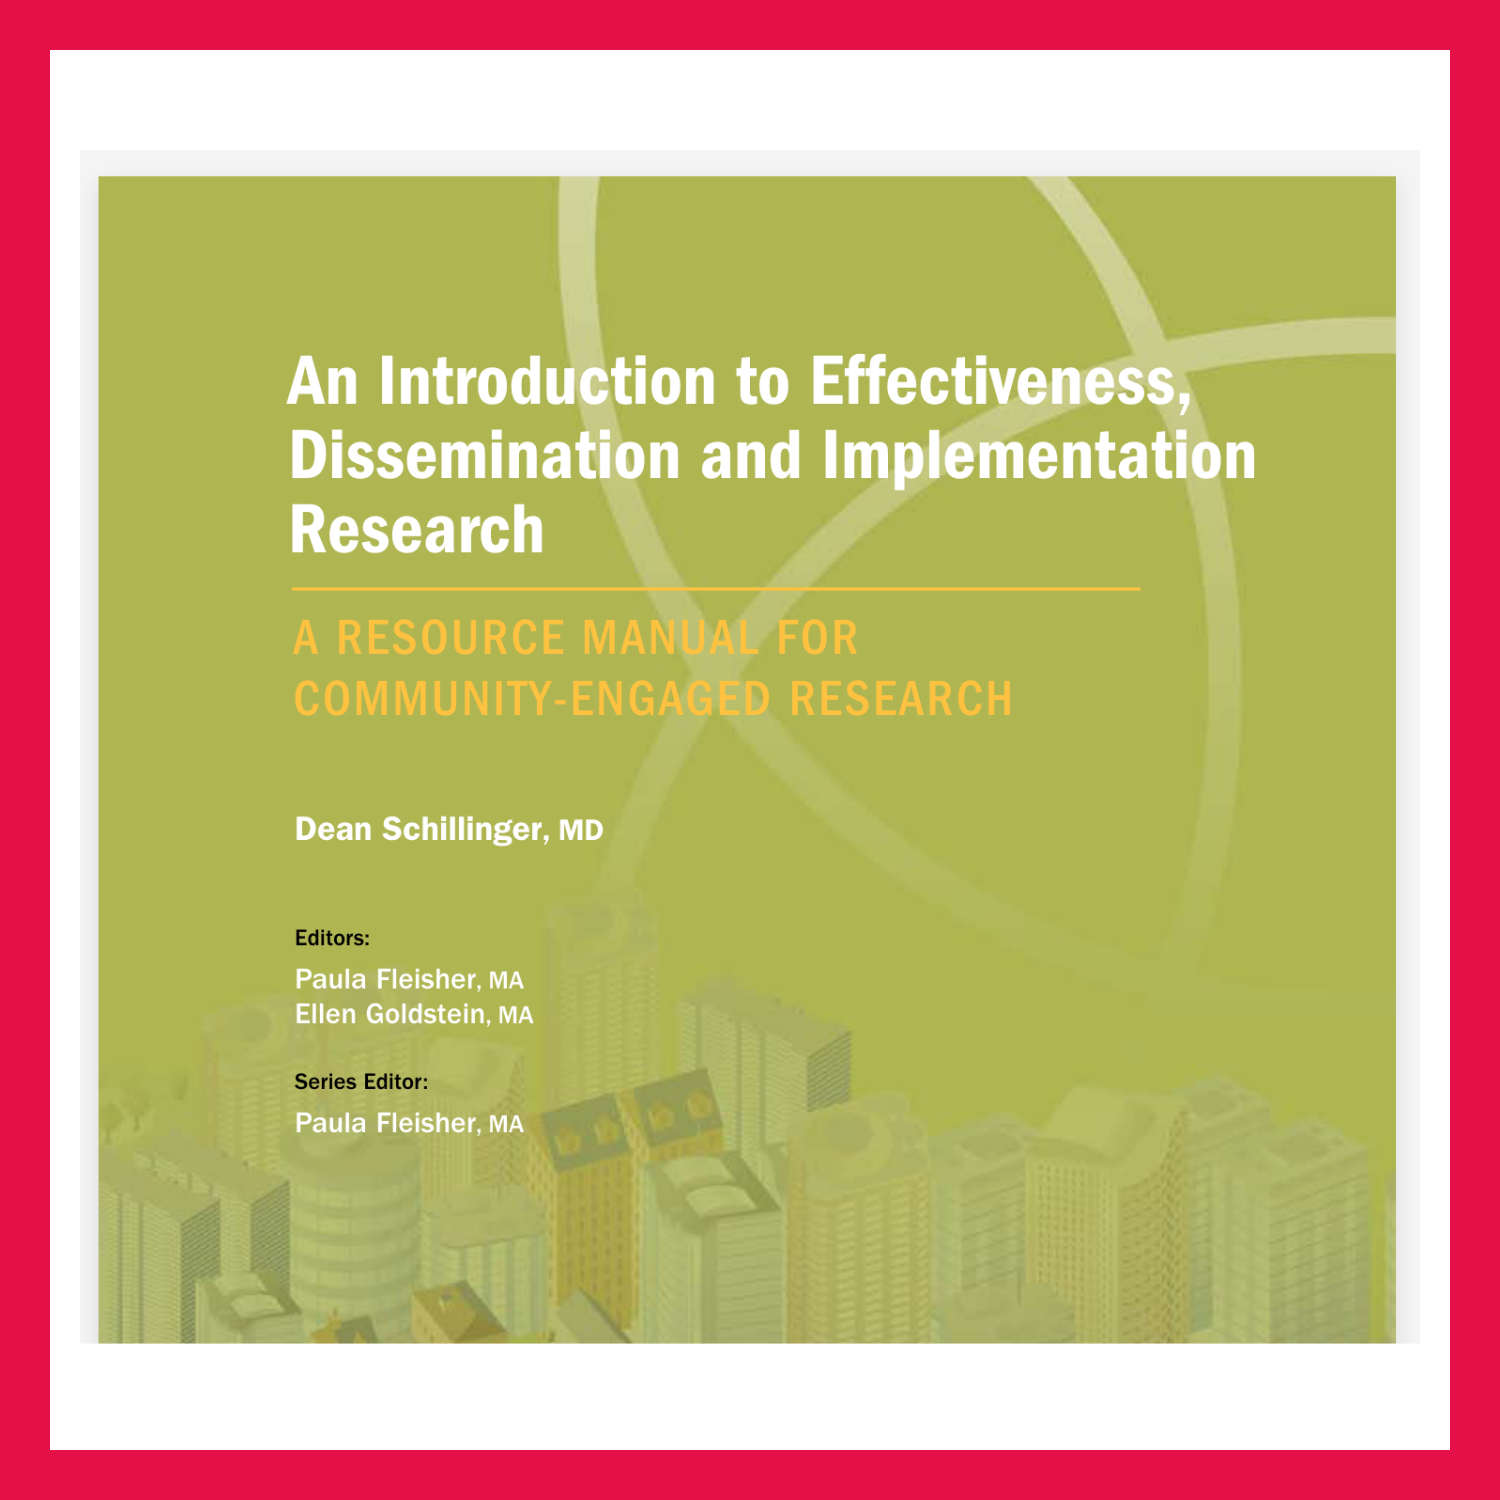   Green poster with white and pink borders titled "An Introduction to Effectiveness, Dissemination and Implementation Research- A Resource Manual for Community-Engaged Research". Below lists names of editors.